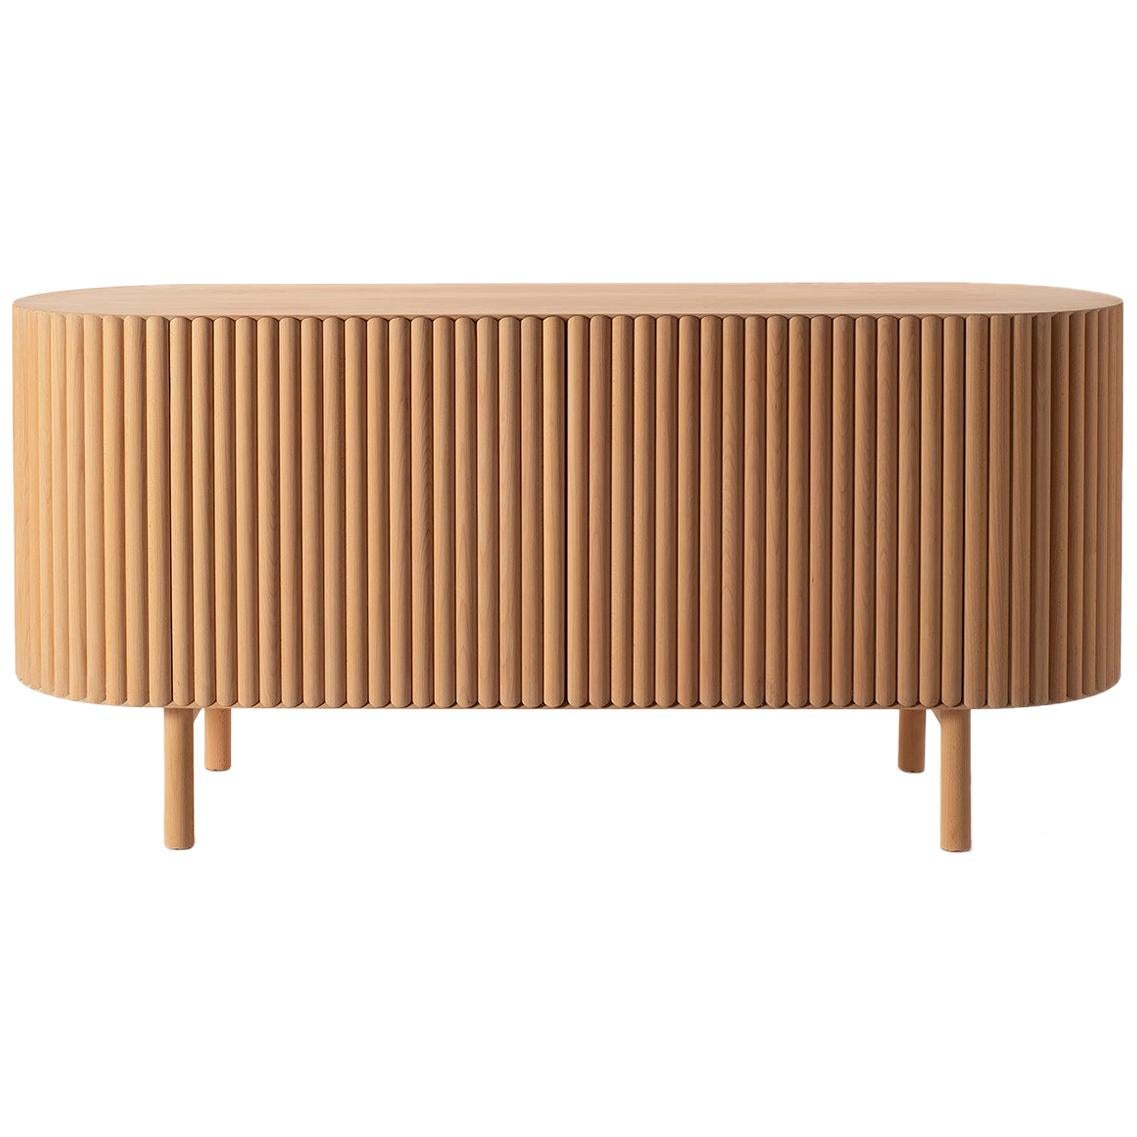 Slatted Beech Wood Rima Credenza by Peca, Customizable For Sale